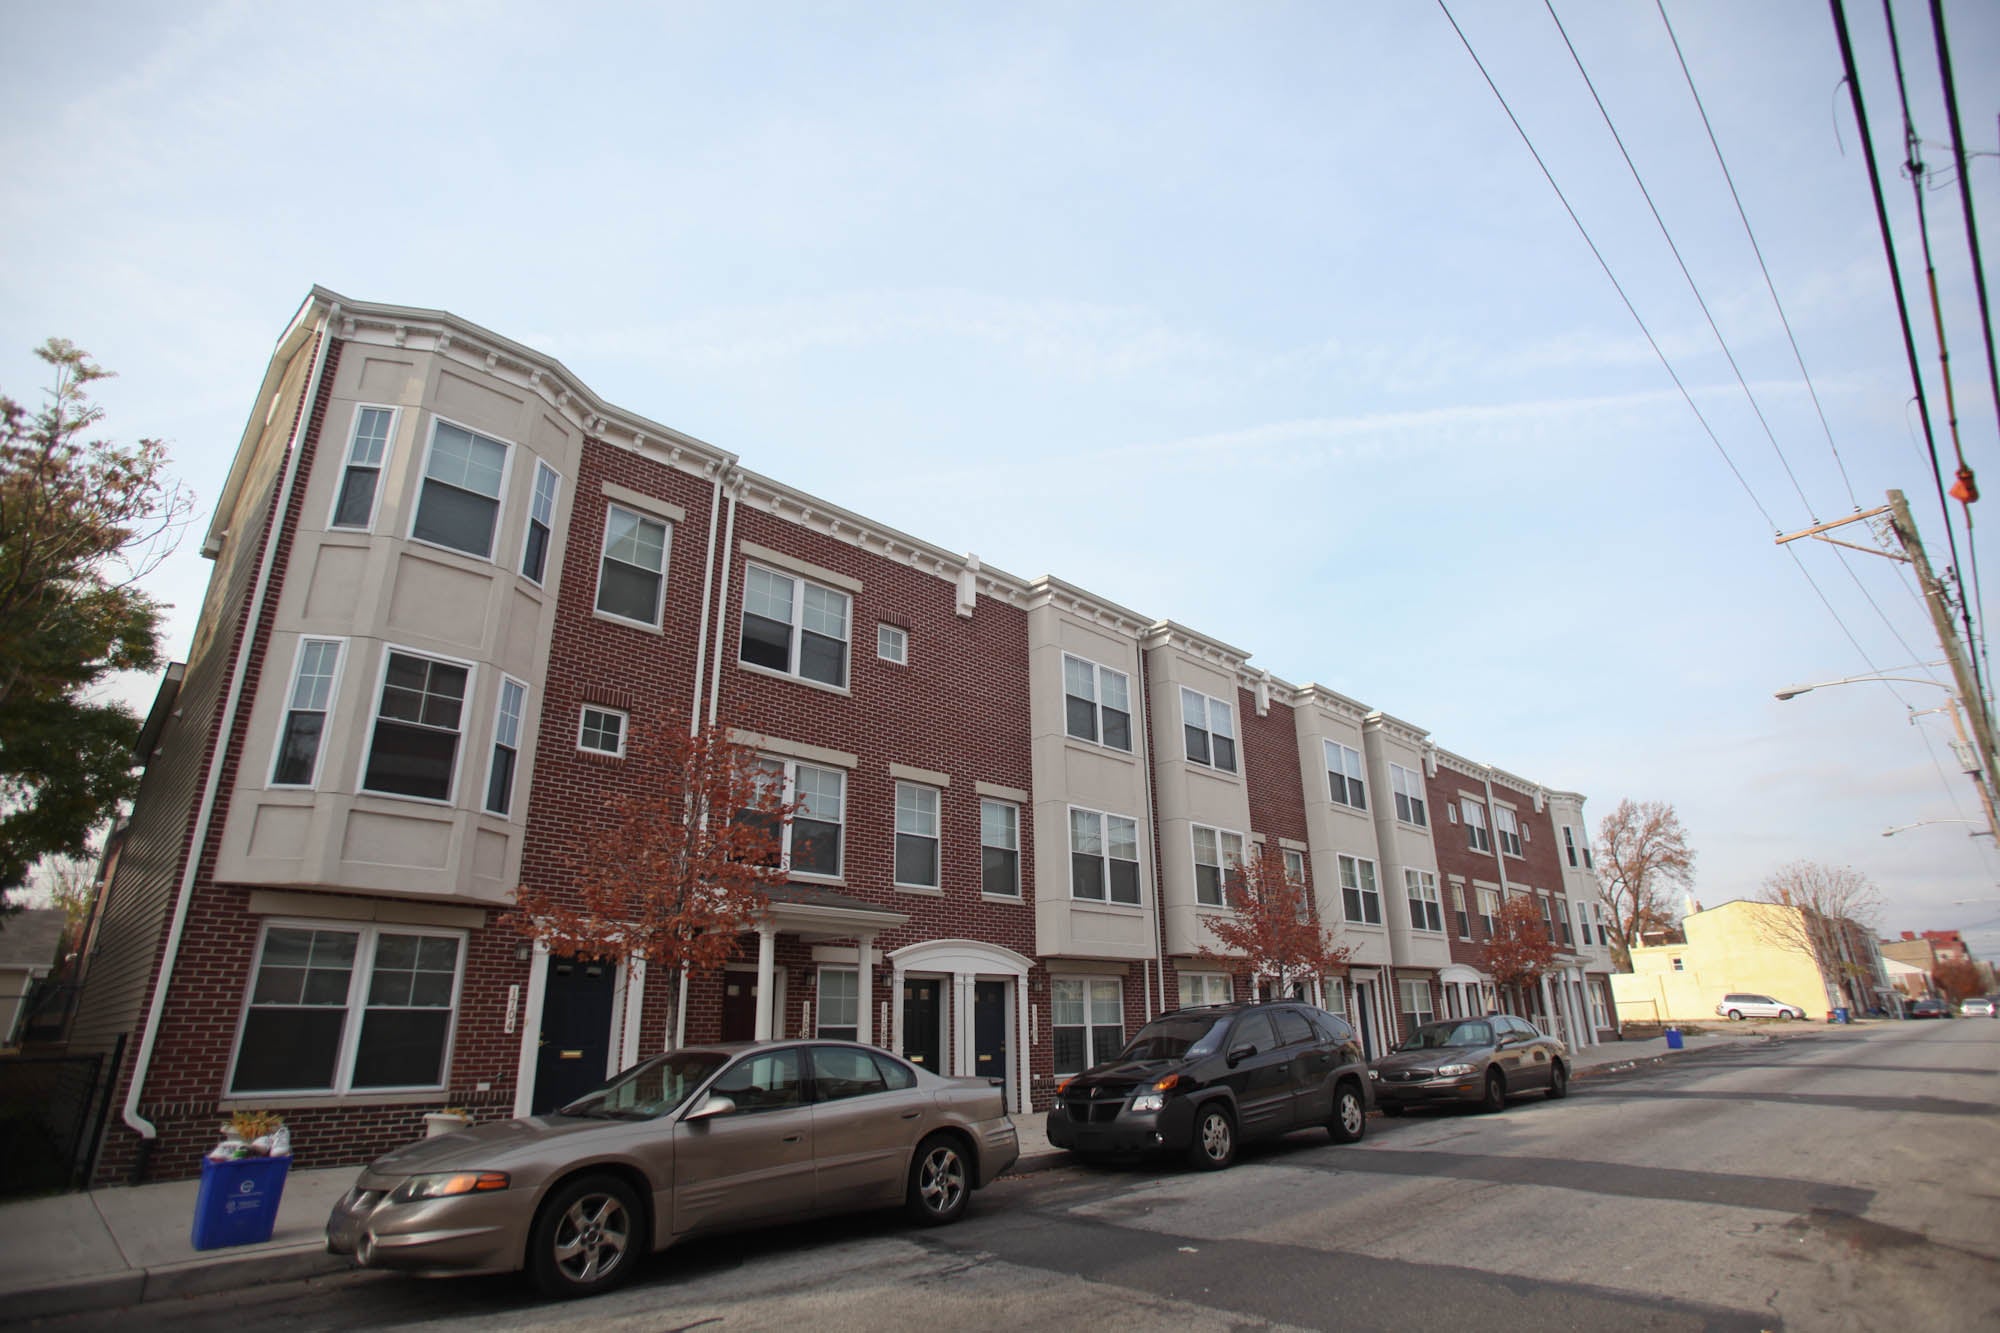  Philadelphia Housing Authority's three and four bedroom Ludlow Home developments located on the 1300 block of Marshall Street. 